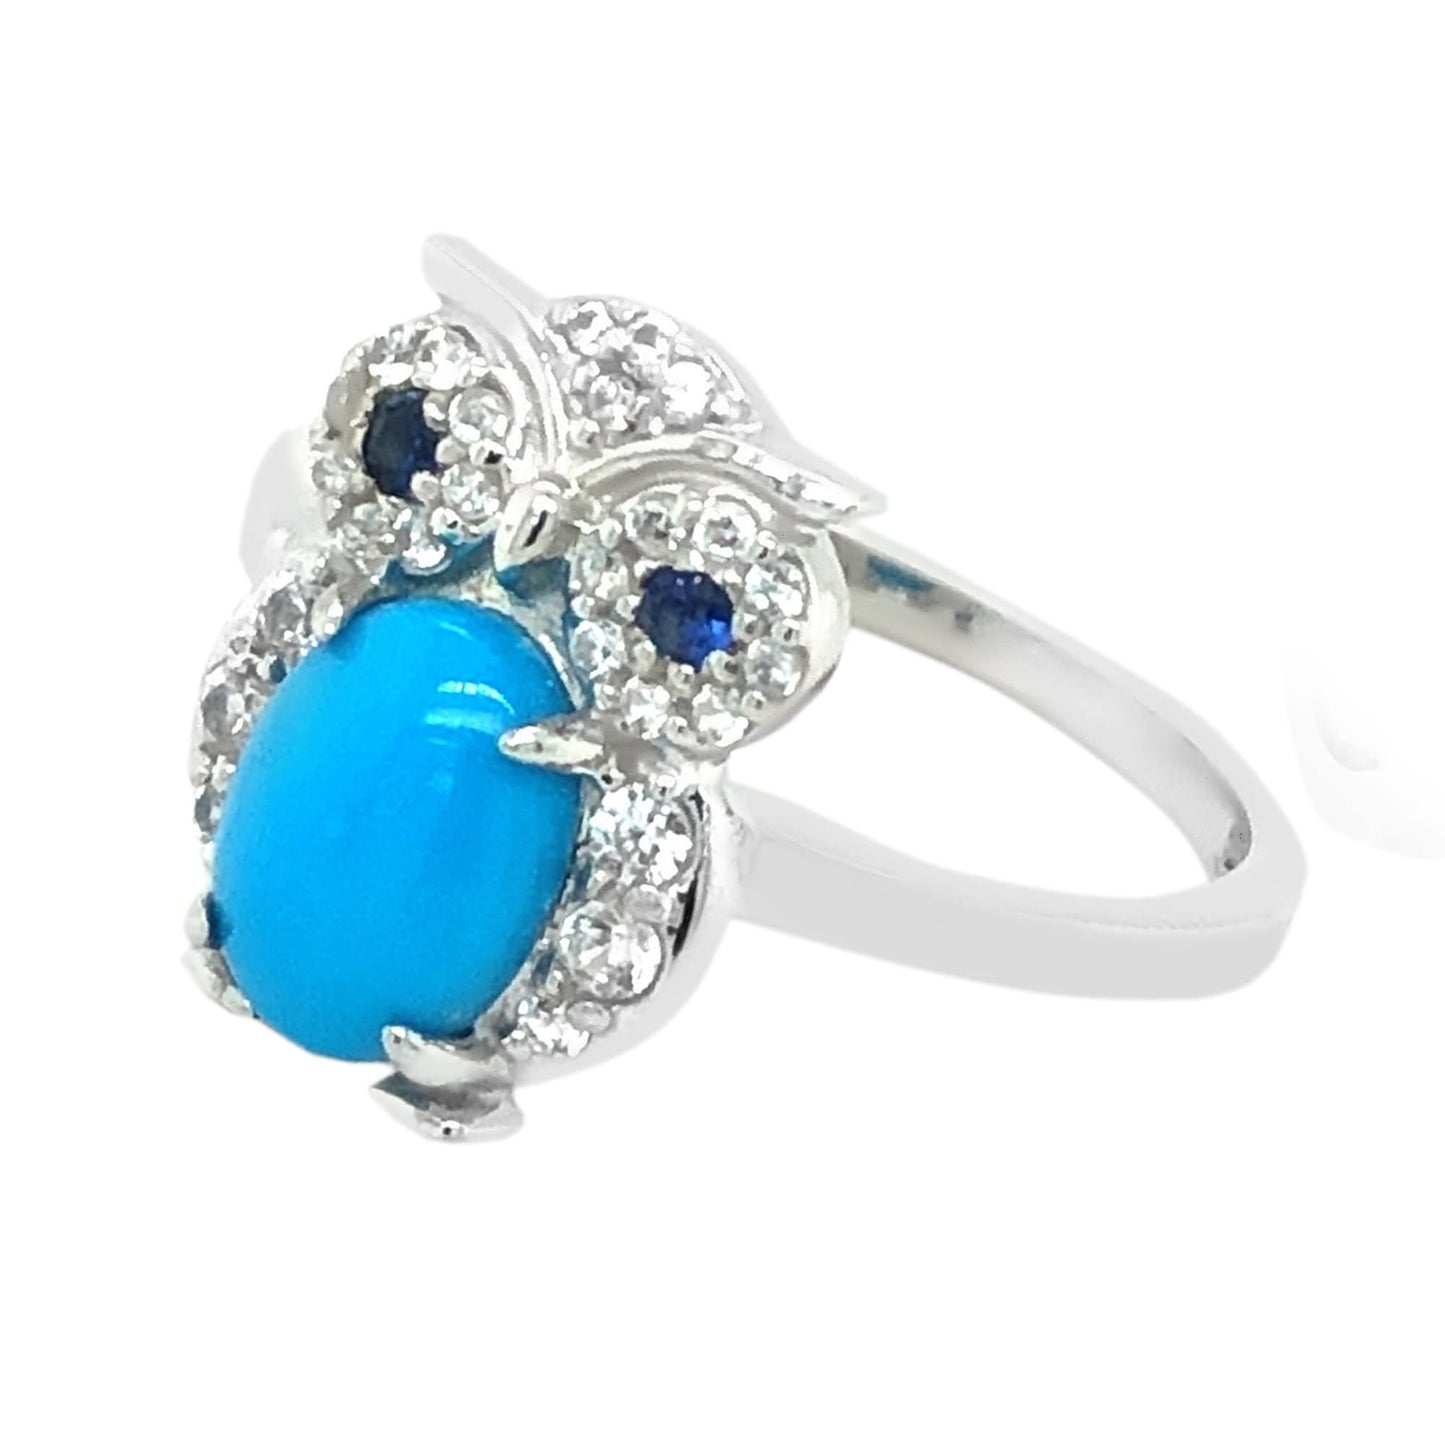 Natural Sleeping Beauty Turquoise Gemstone Silver Ring Owl Ring 925 Sterling Silver Turquoise Ring Gift For Her